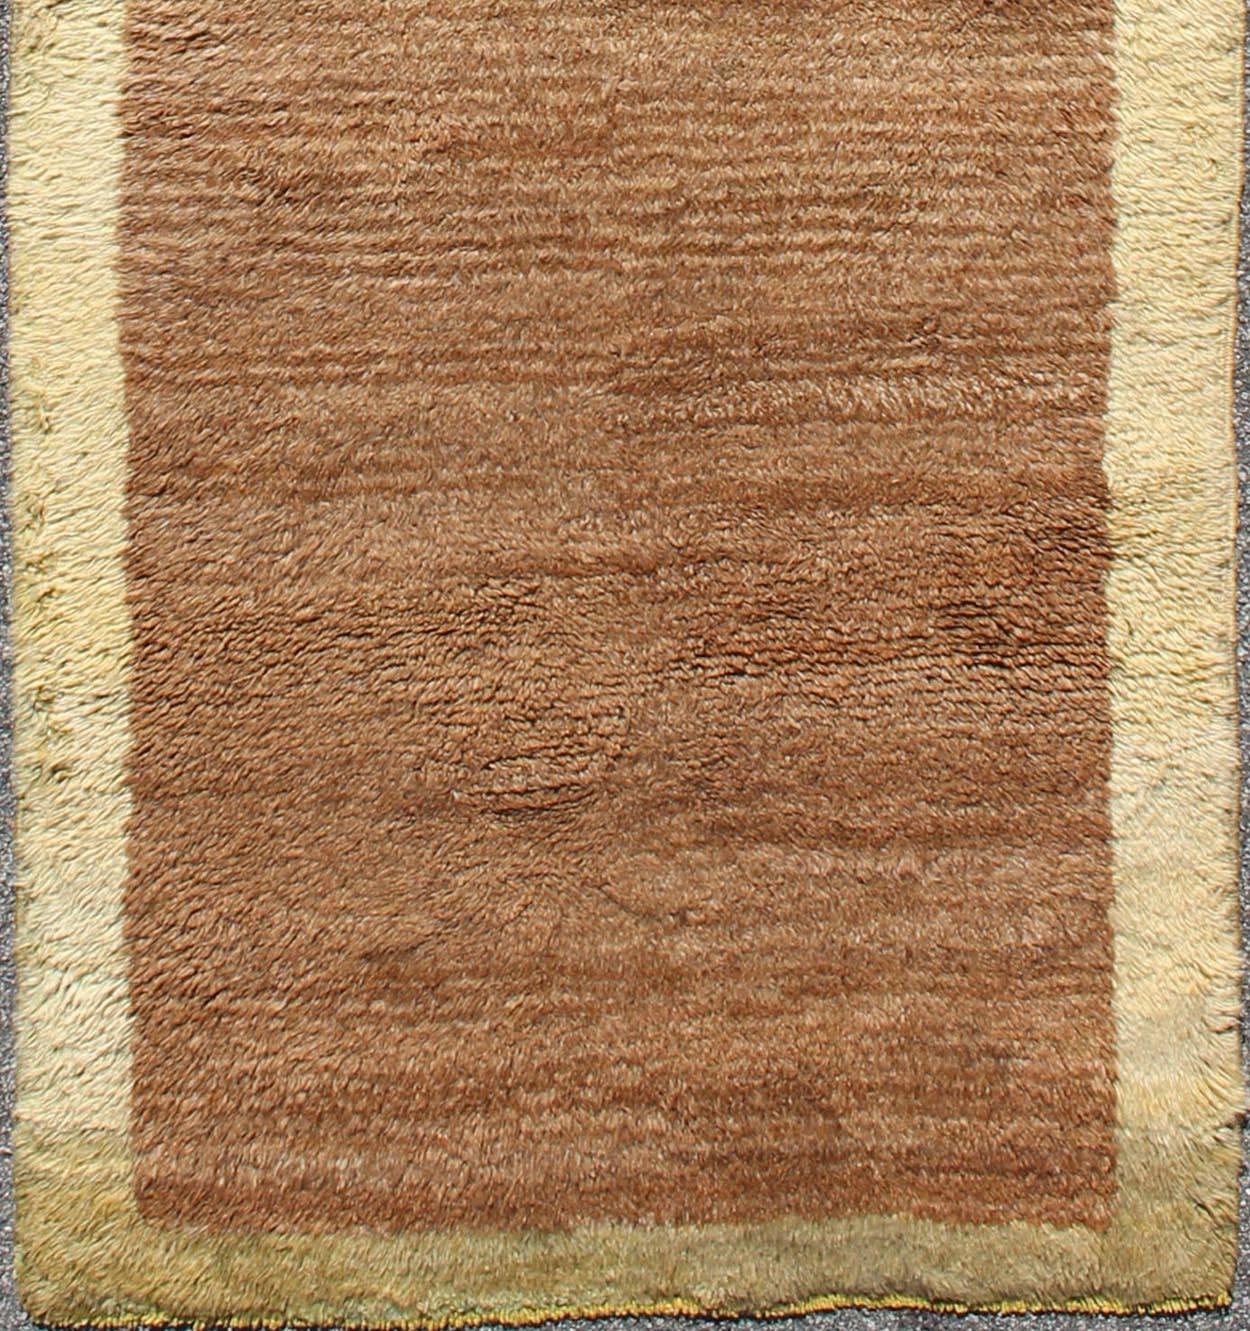 Mid-Century Modern Turkish Tulu rug with open brown field and cream Border, rug en-645, country of origin / type: Turkey / Tulu, circa 1940

Vintage Tulu rugs are some of the most beautiful textile creations in the entire world. They are soft,